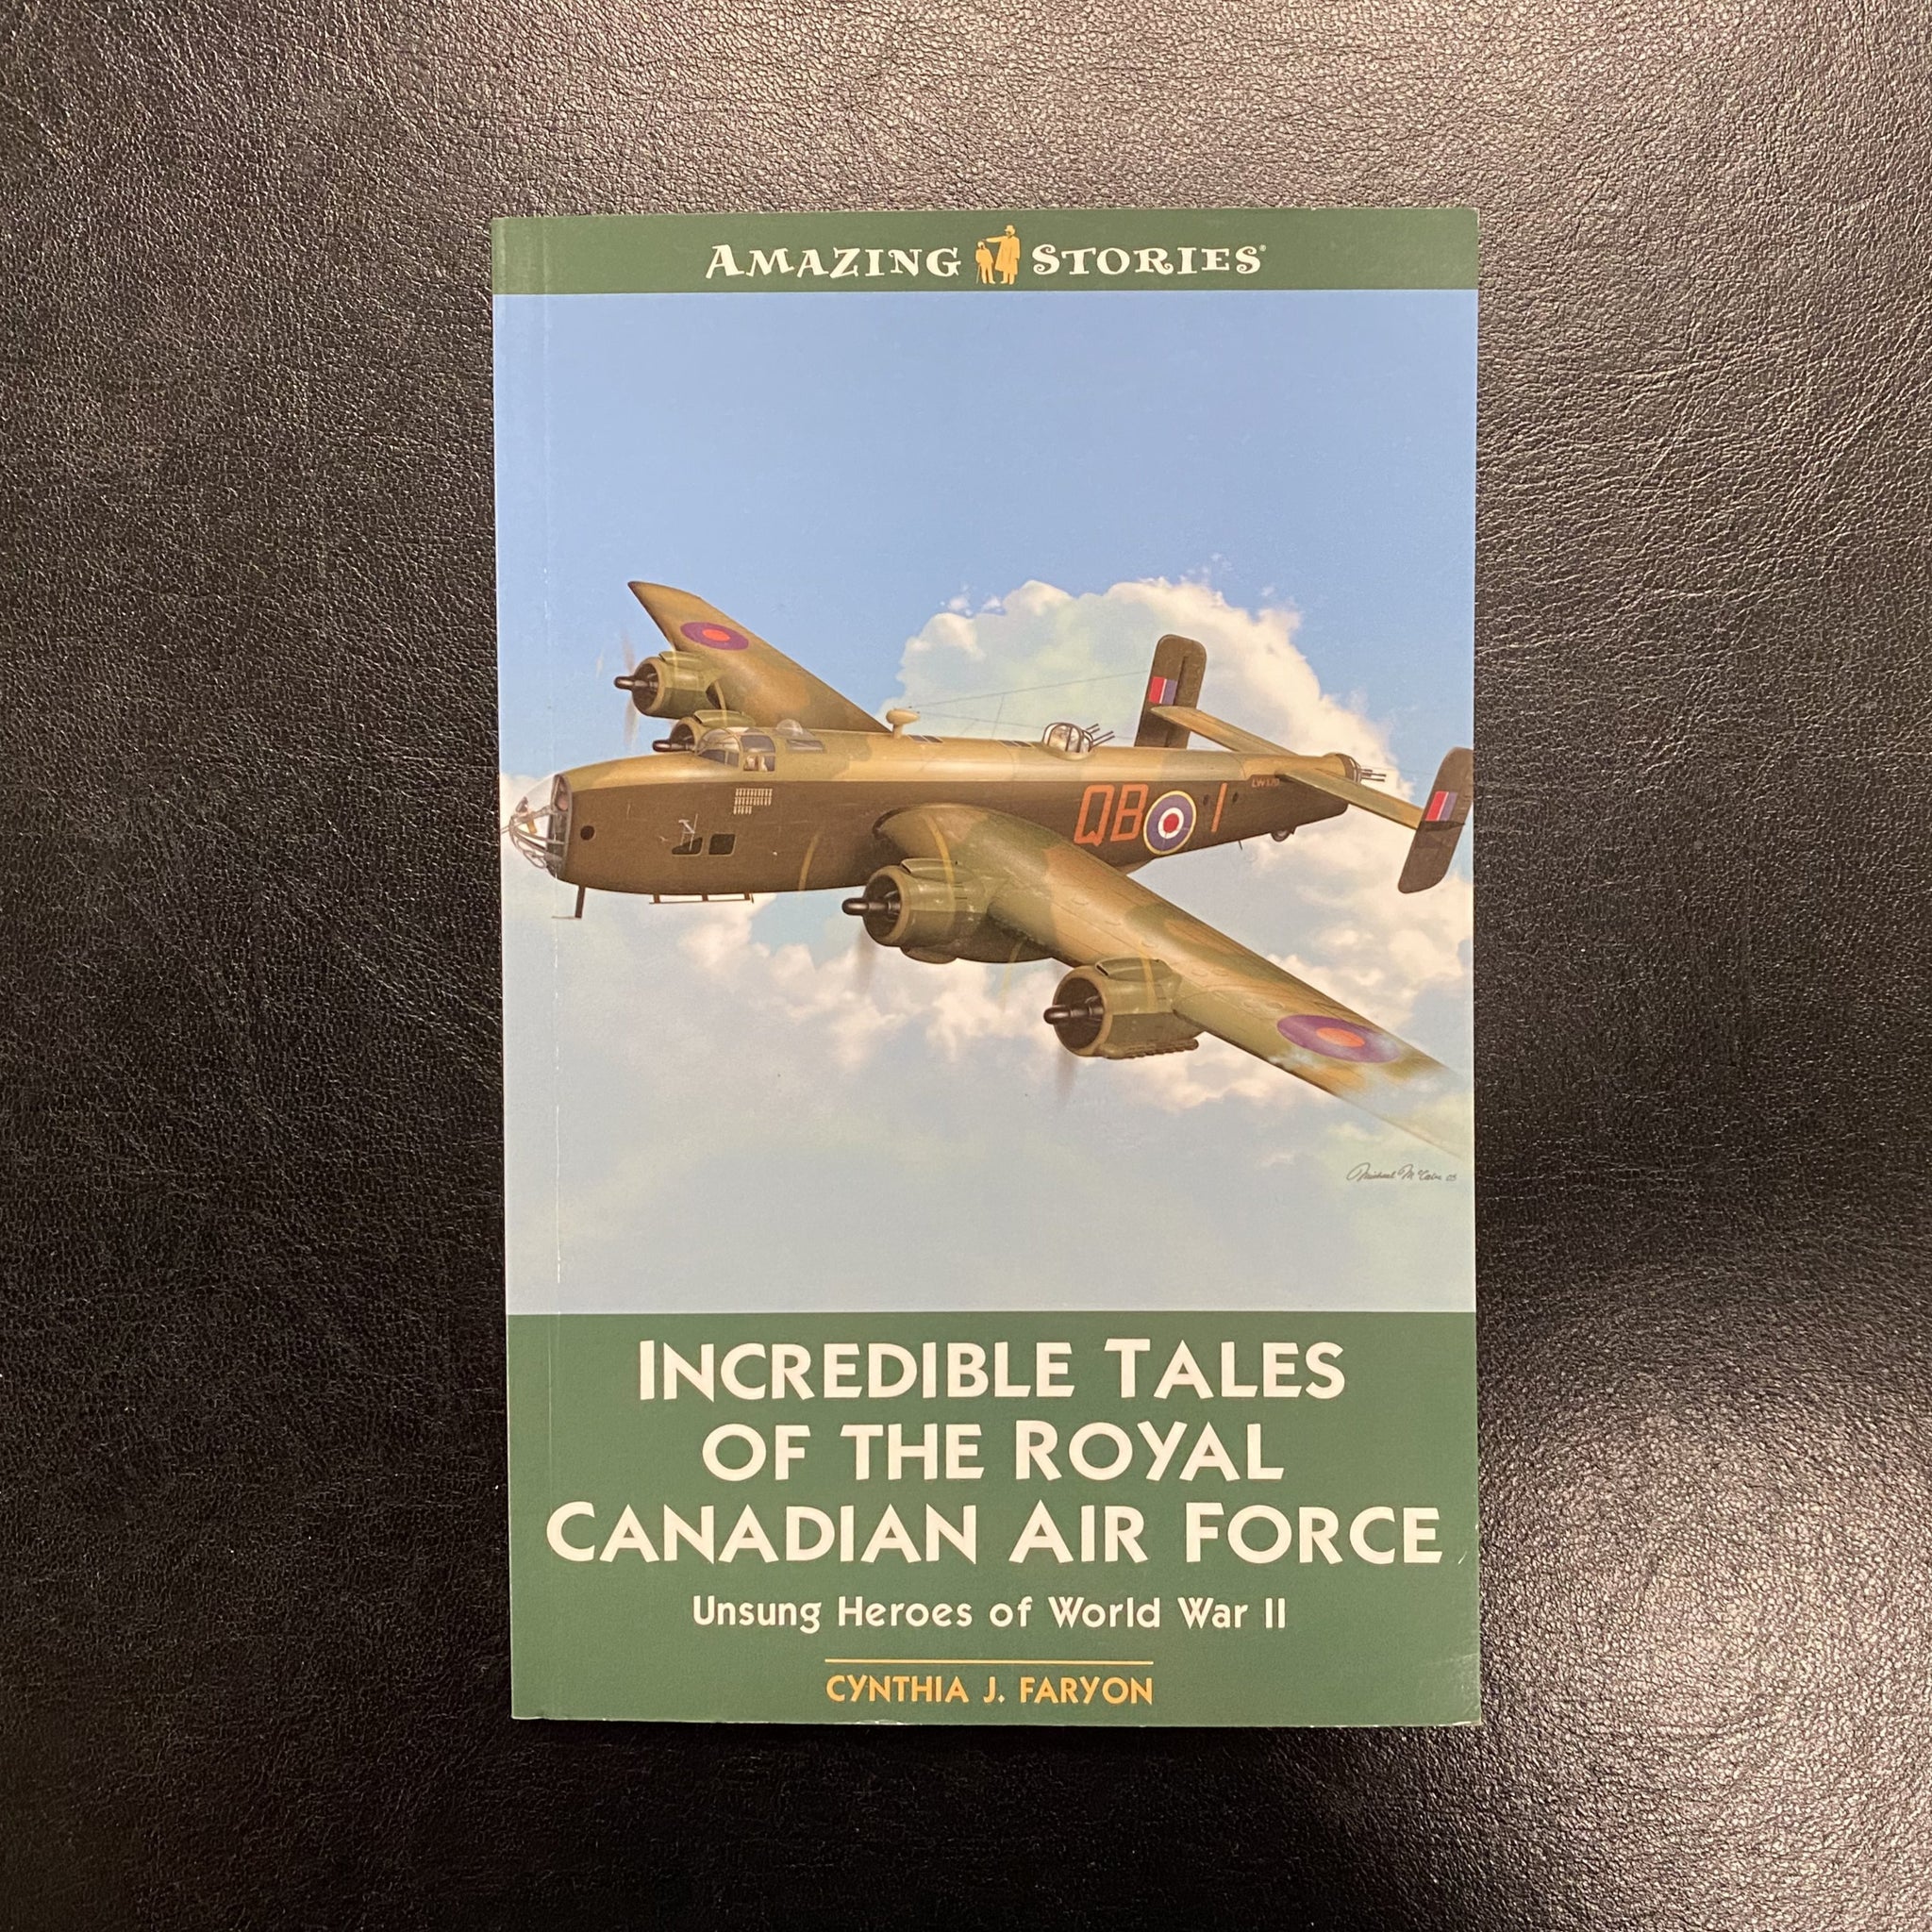 Incredible Tales of the Royal Canadian Air Force by Cynthia J. Faryon